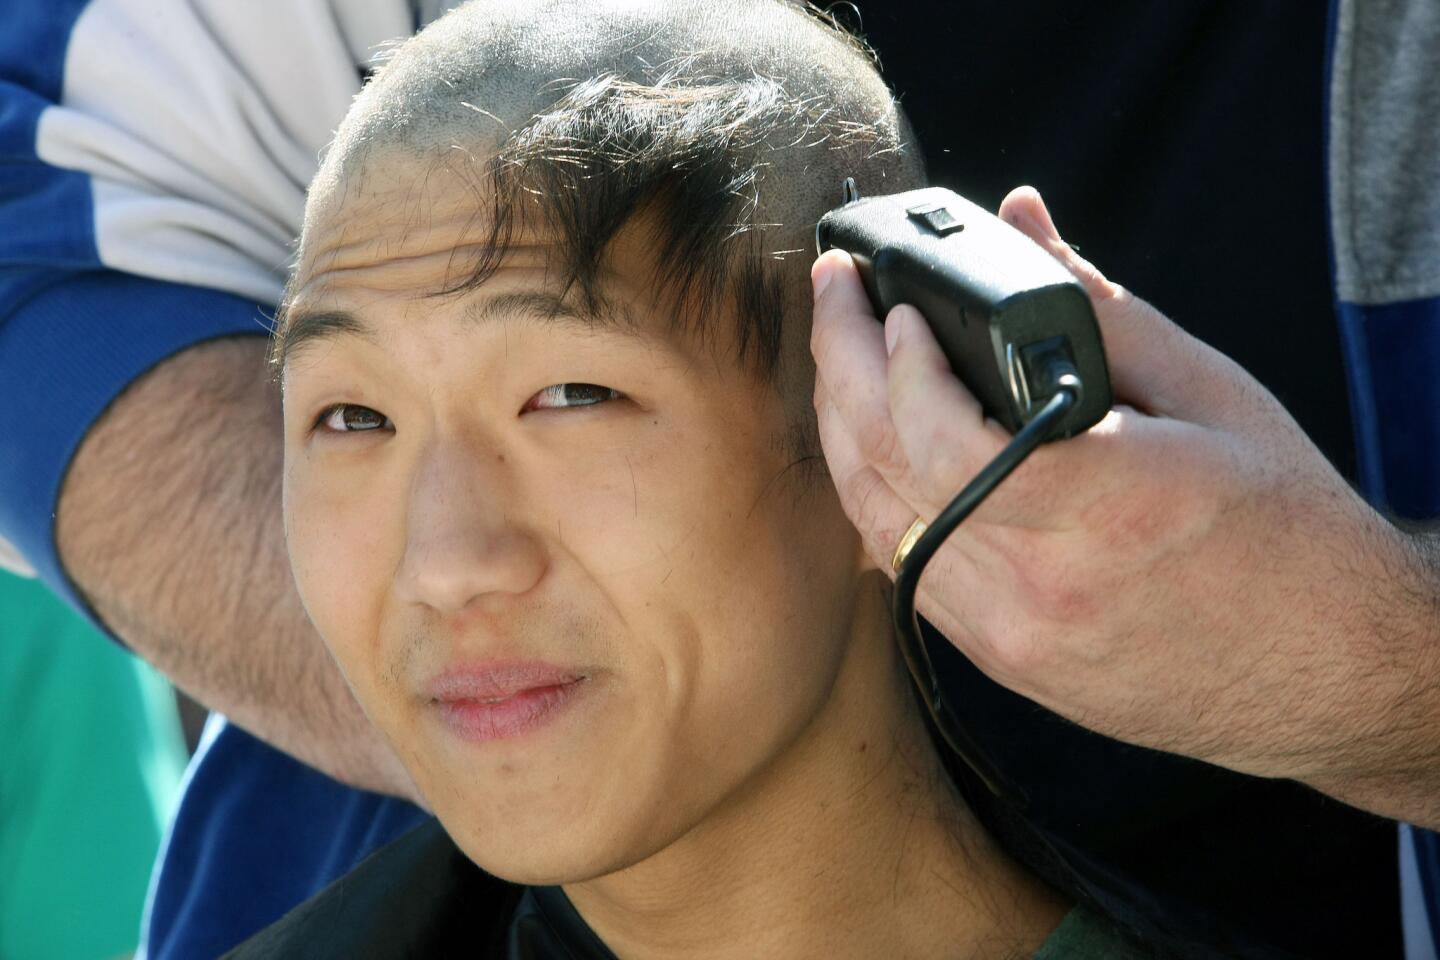 Photo Gallery: Hair loss for a cause